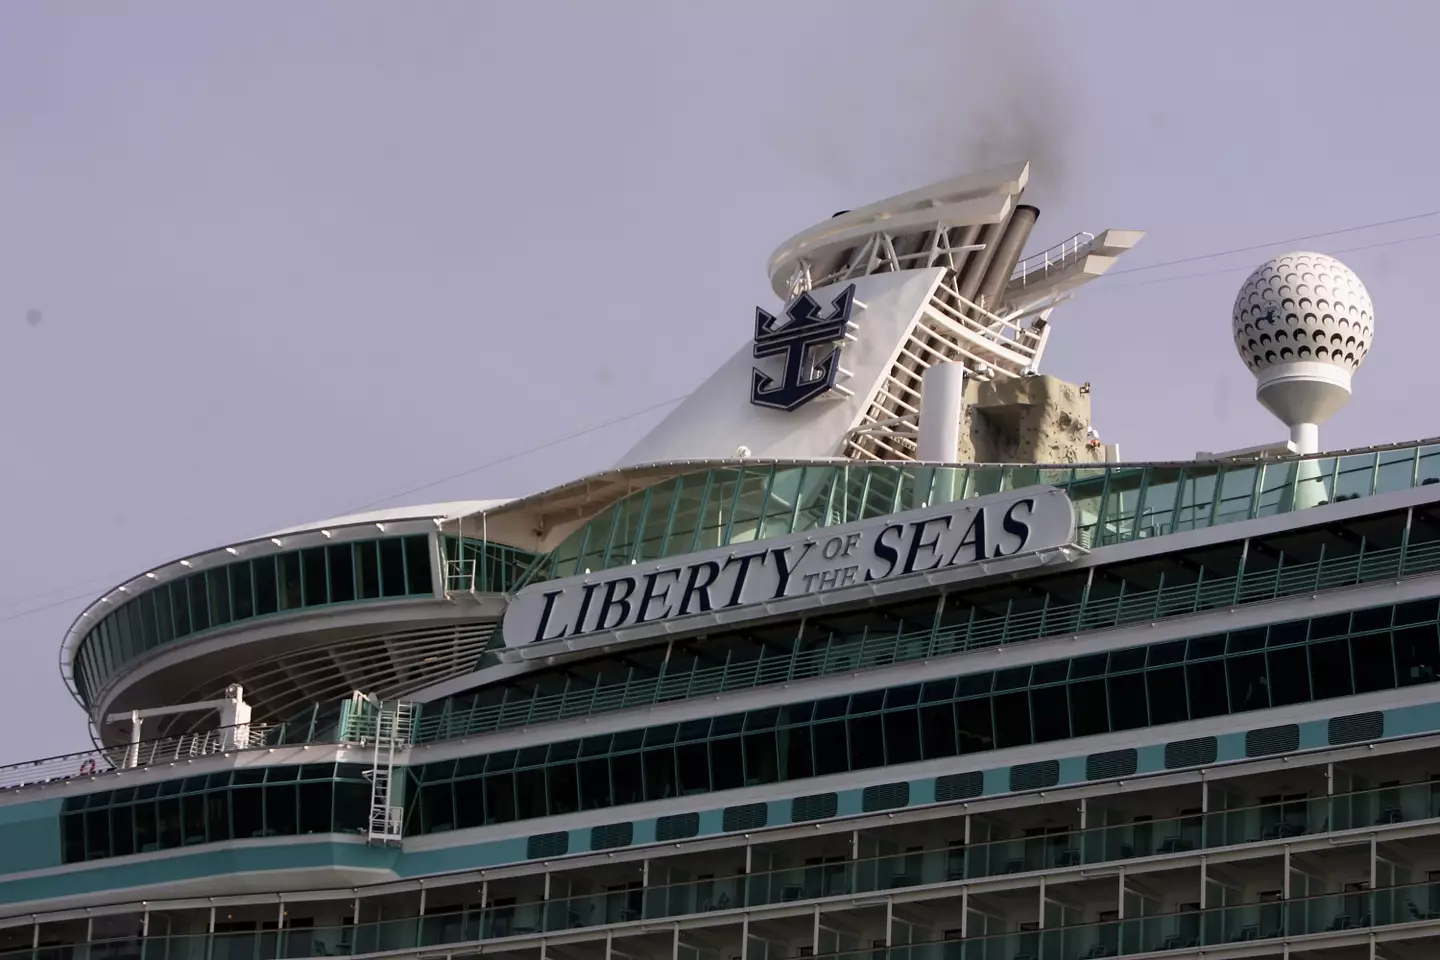 The incident occurred on the Royal Caribbean's Liberty of the Seas.